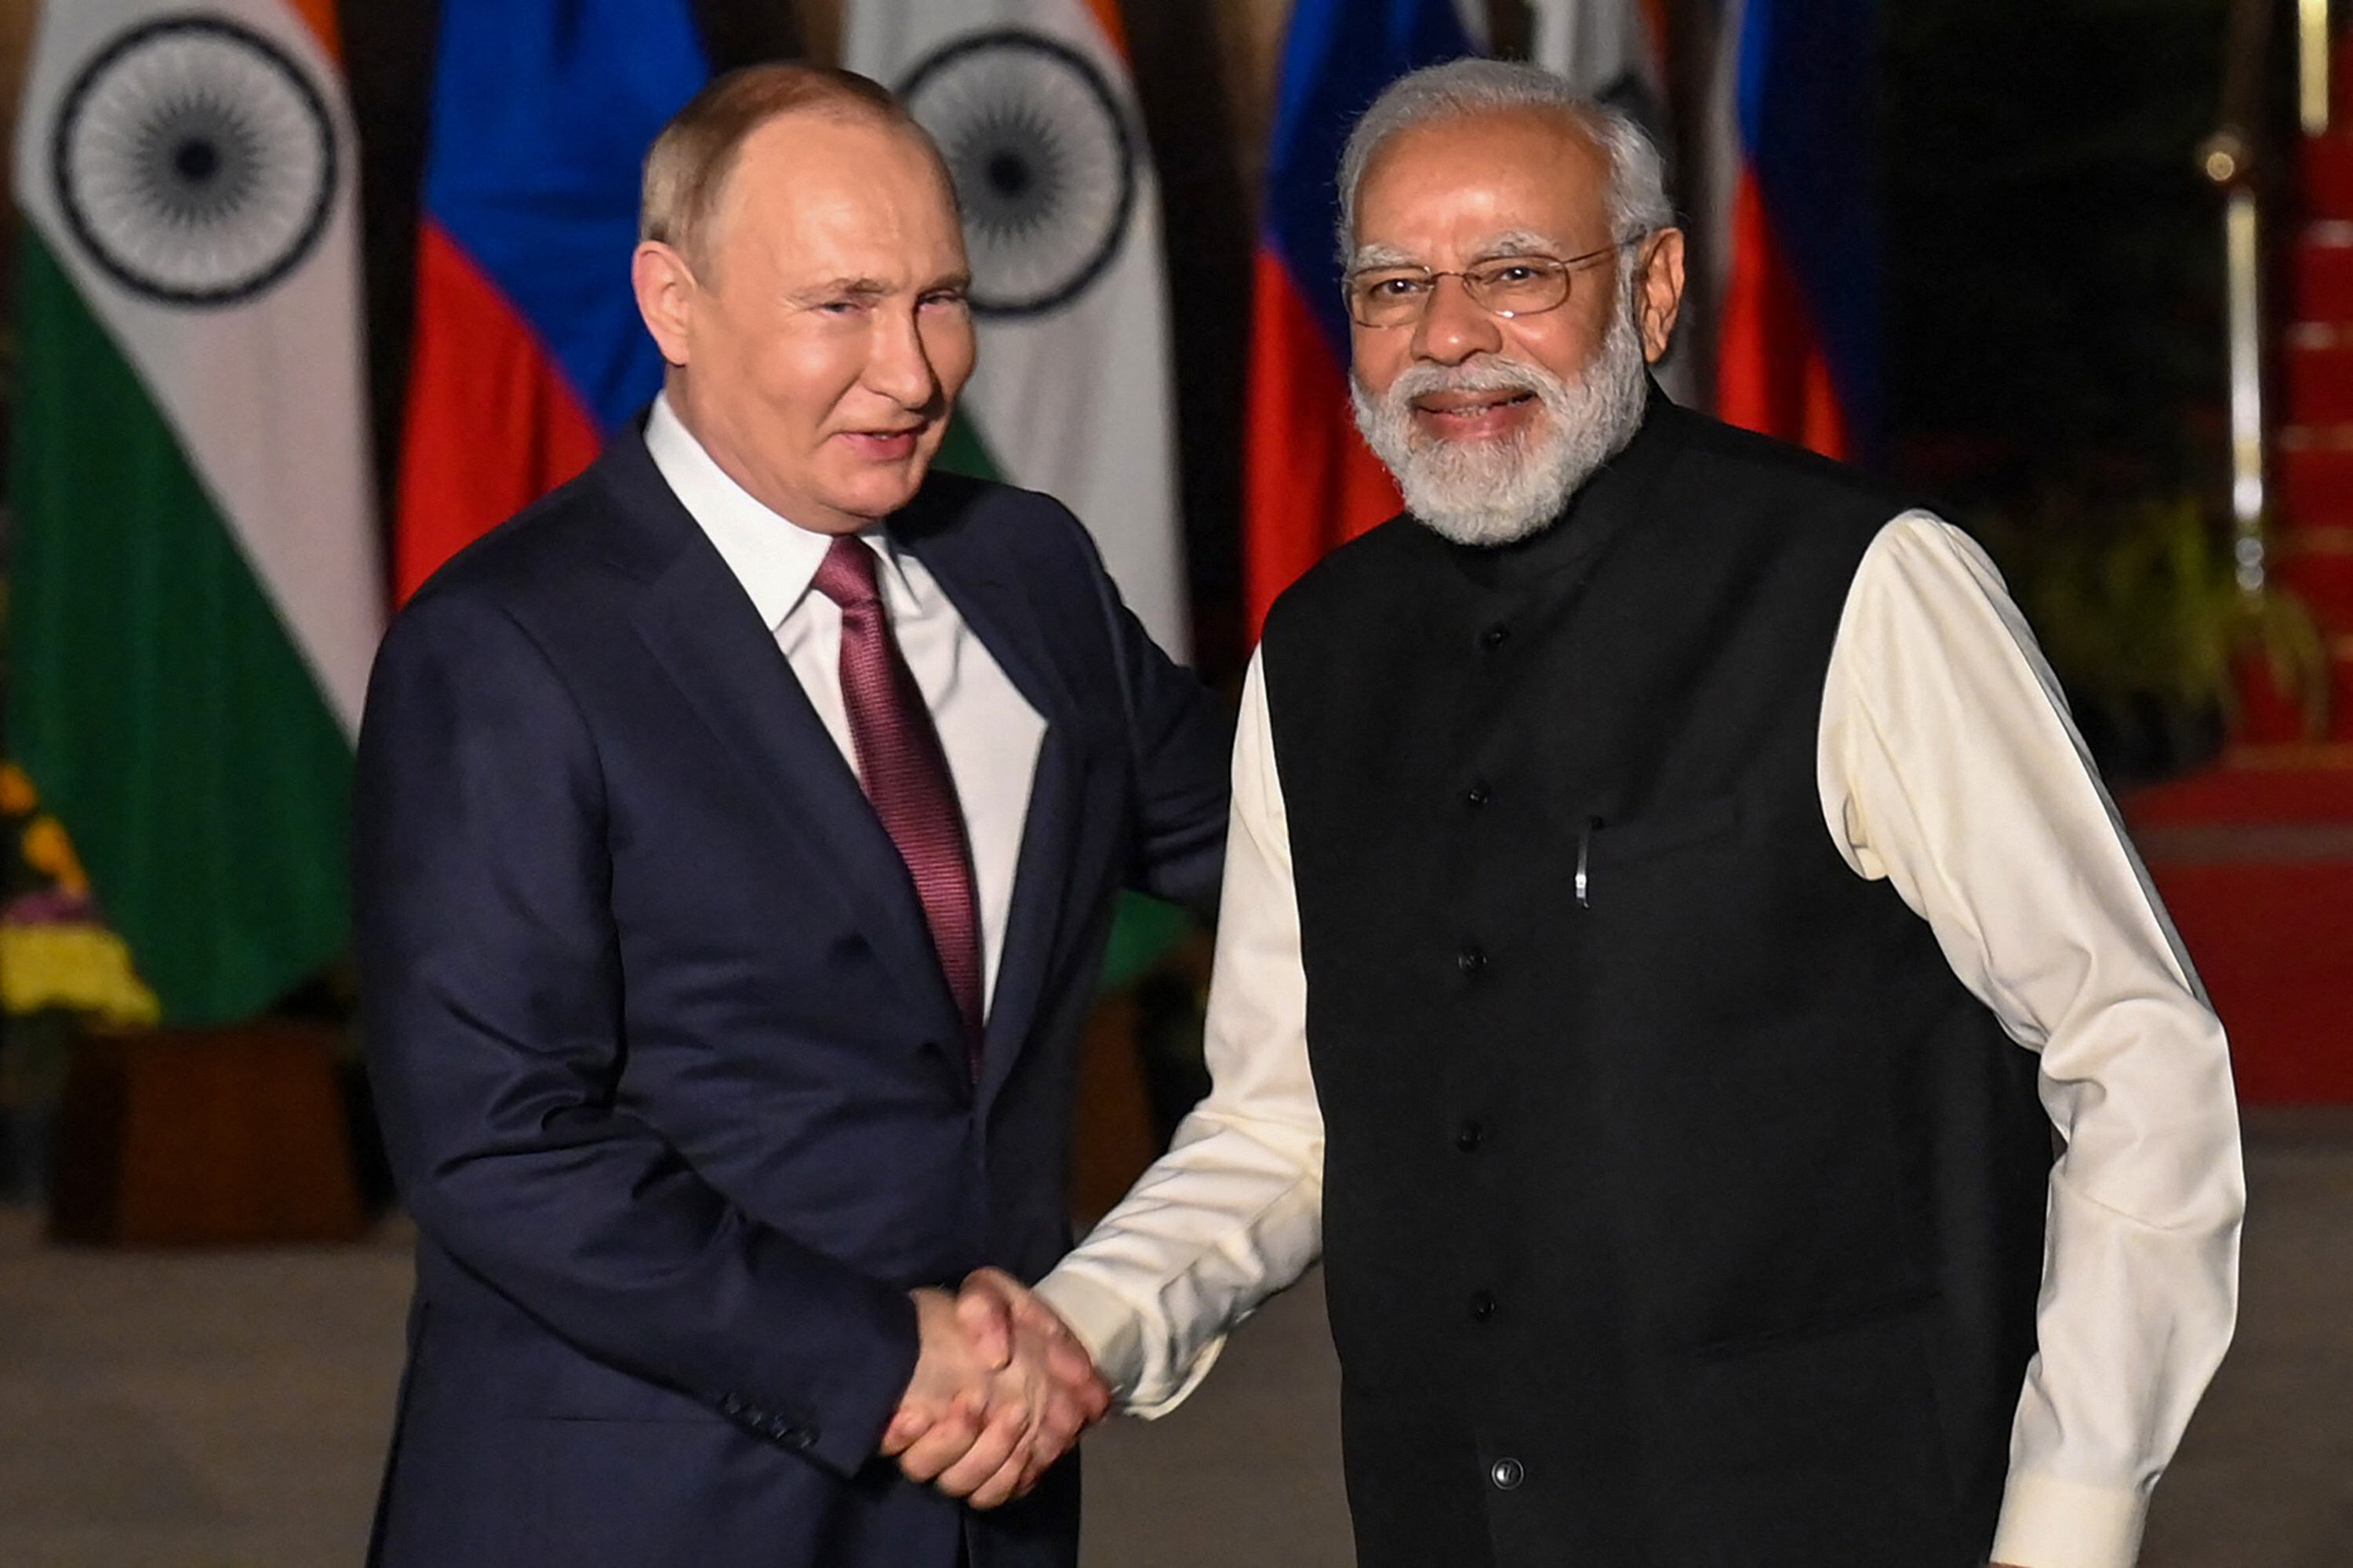 Indian Prime Minister Narendra Modi greets Russian President Vladimir Putin before their December meeting in New Delhi. Photo: AFP via Getty Images/TNS